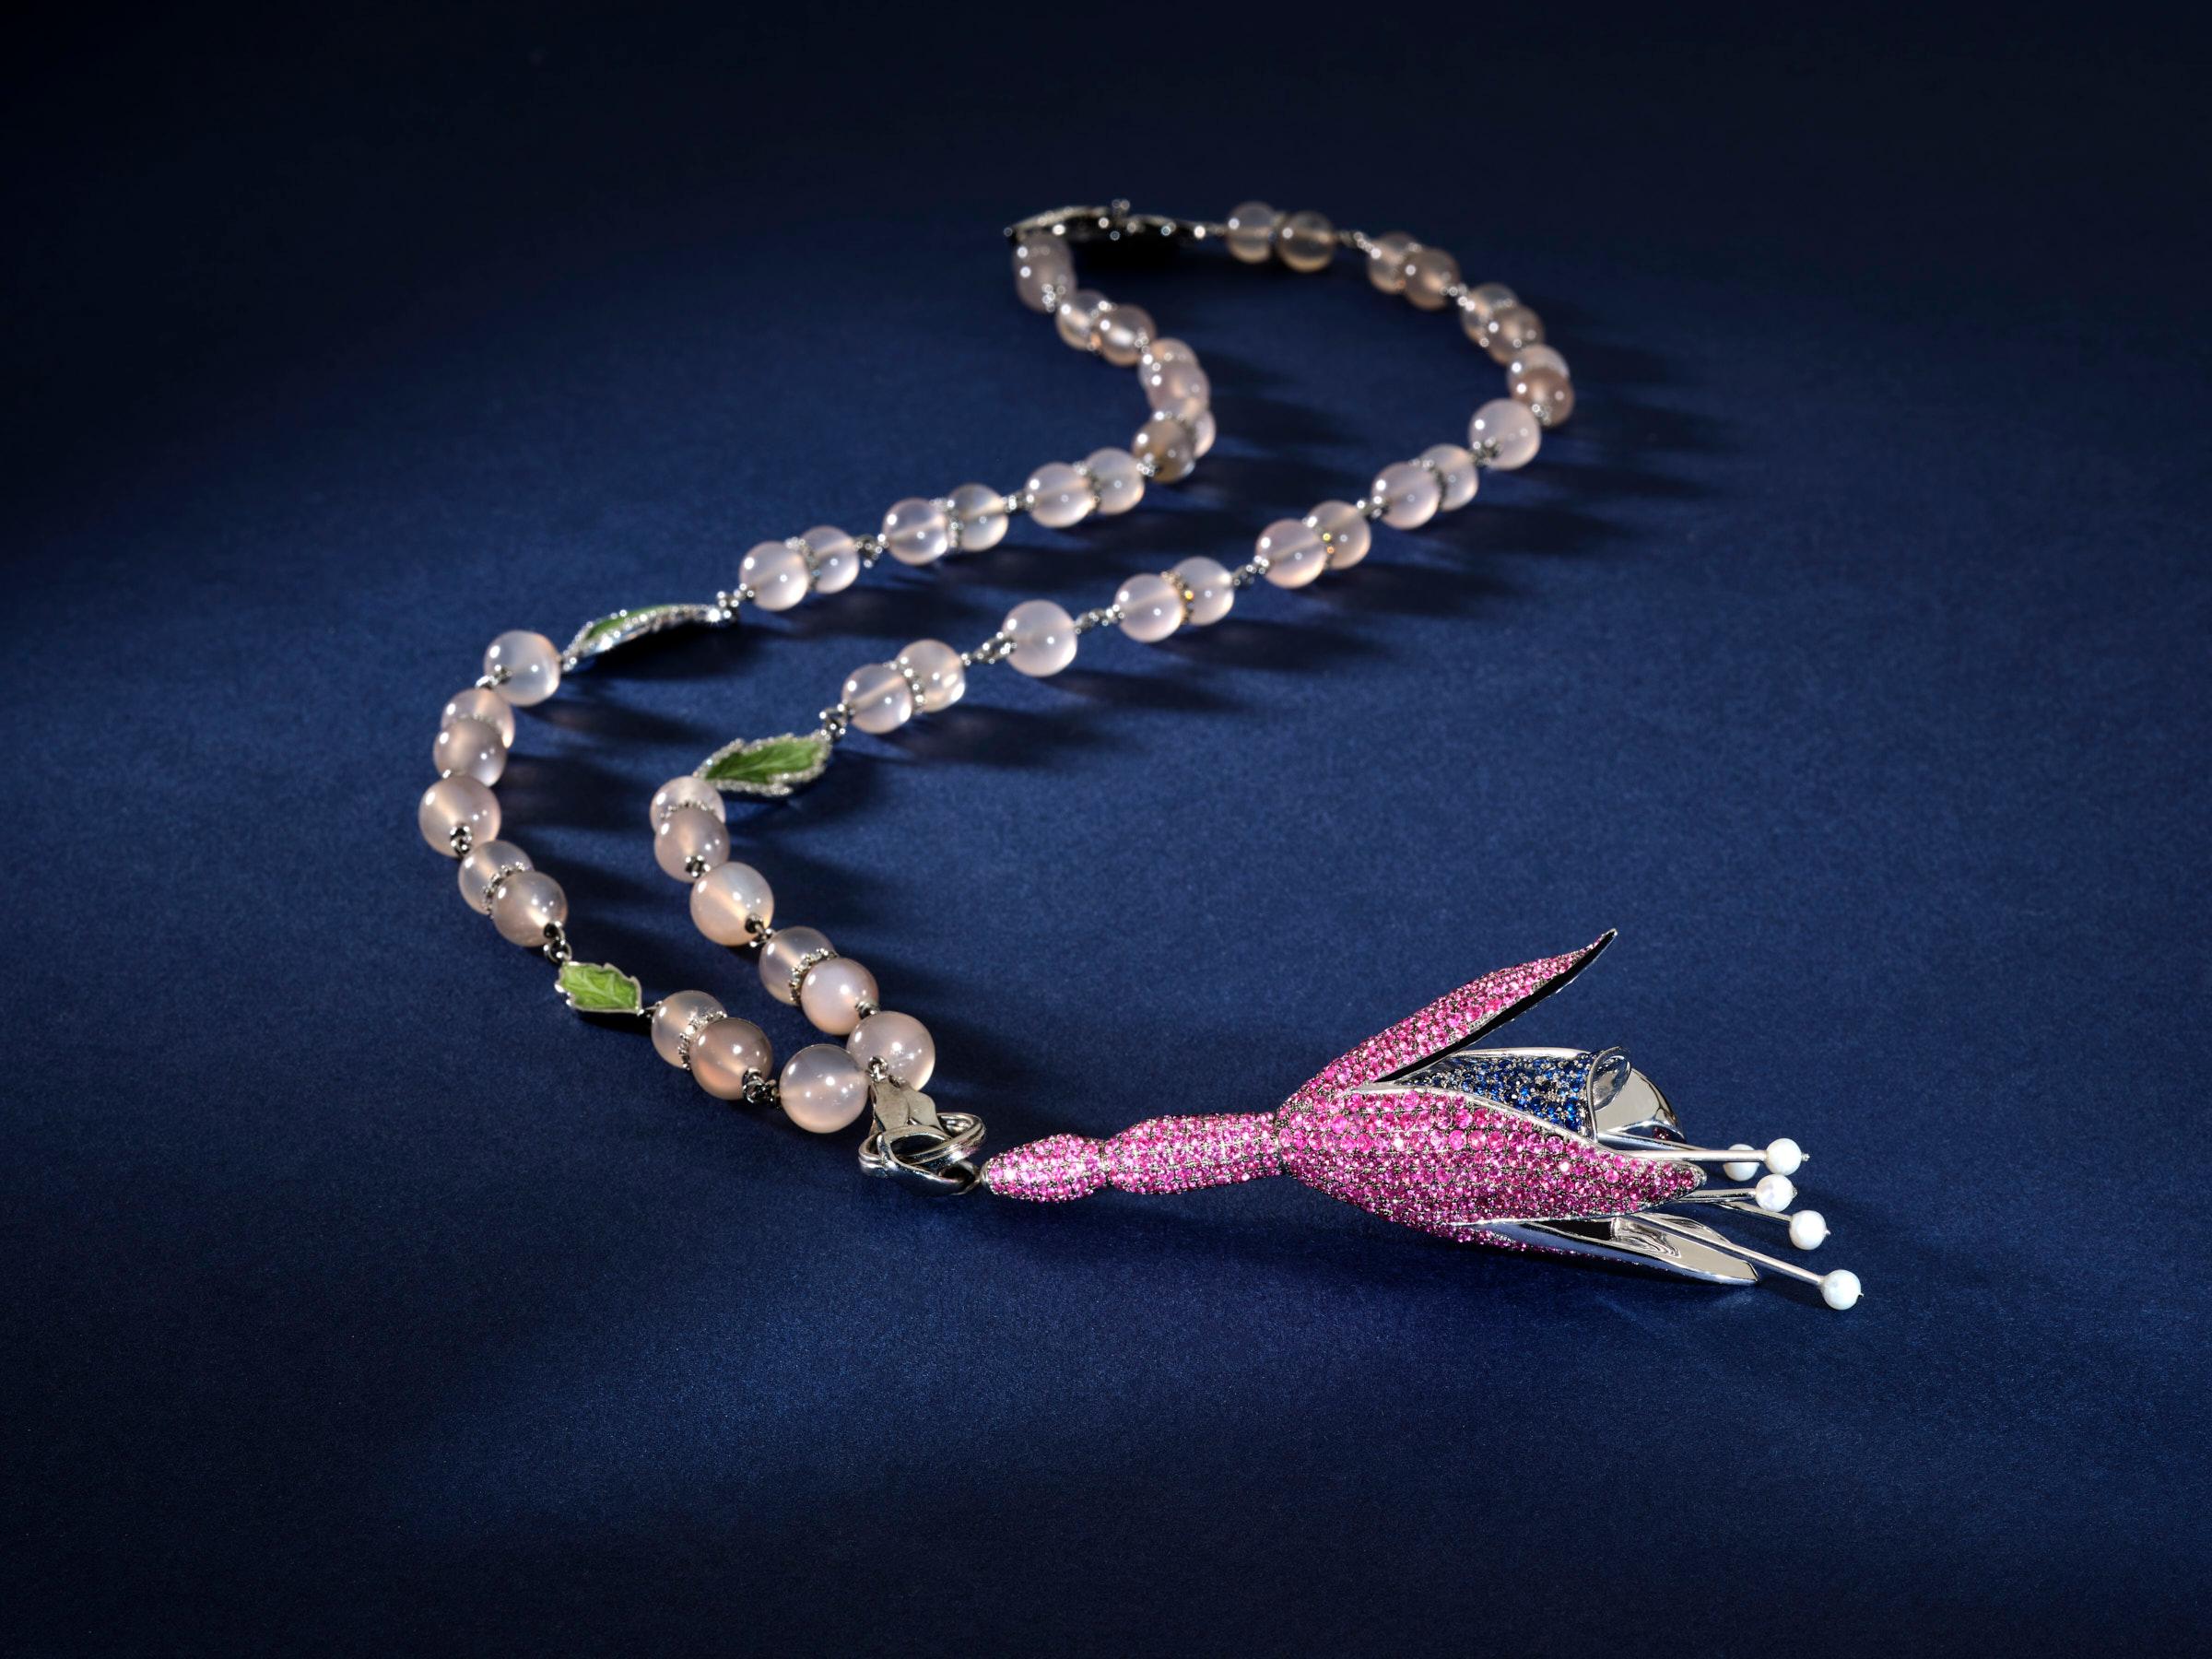 This necklace is true masterpiece, and one and only sample hand made by artisans in Grand Bazaar. It's production took more than 3 months, with more than 2000 stones set on the pendant. 
it is made of 18k white gold, diamonds (4 ct) blue and pink